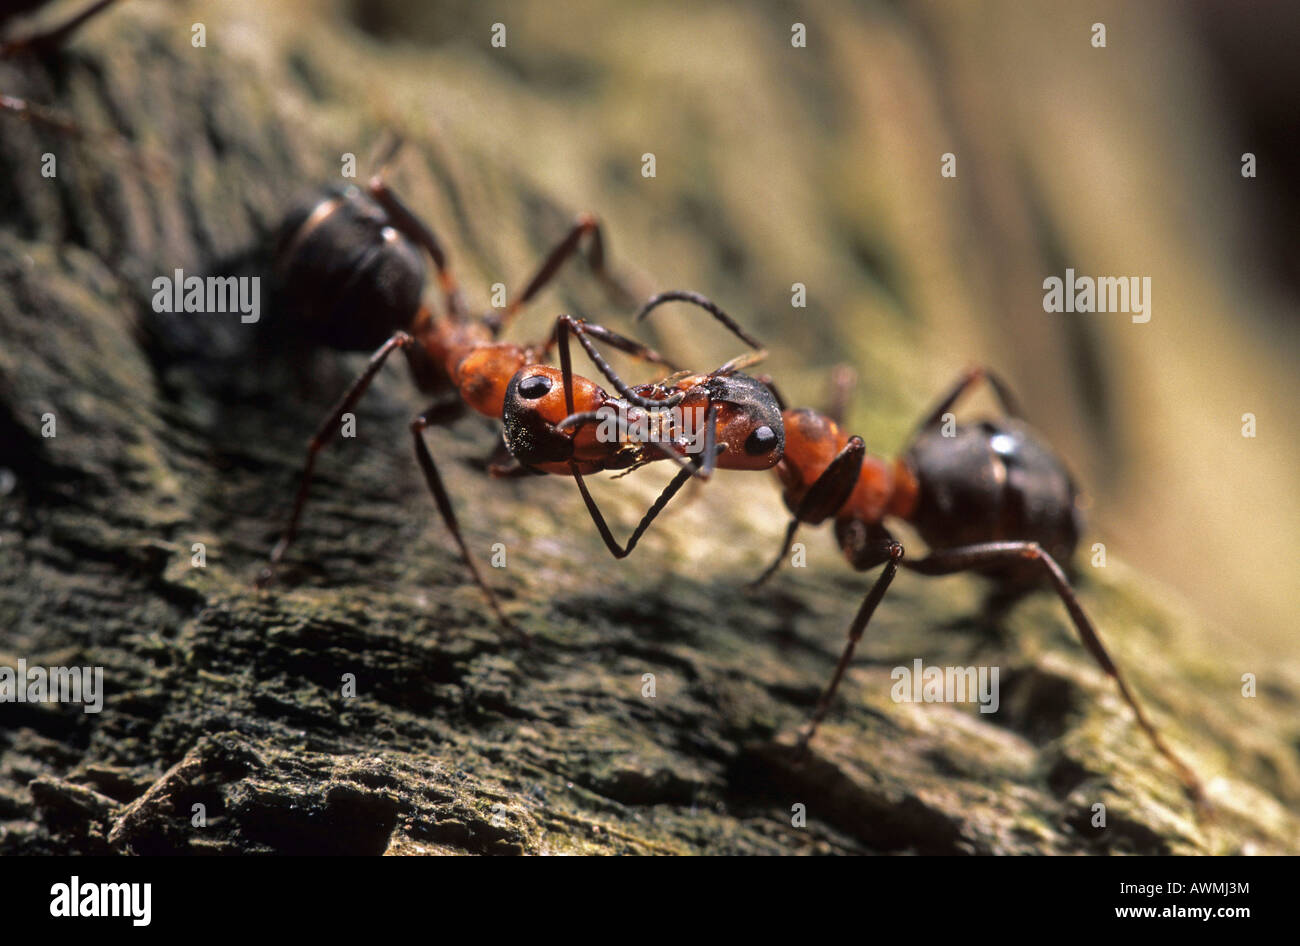 European red wood ant (Formica polyctena) Stock Photo